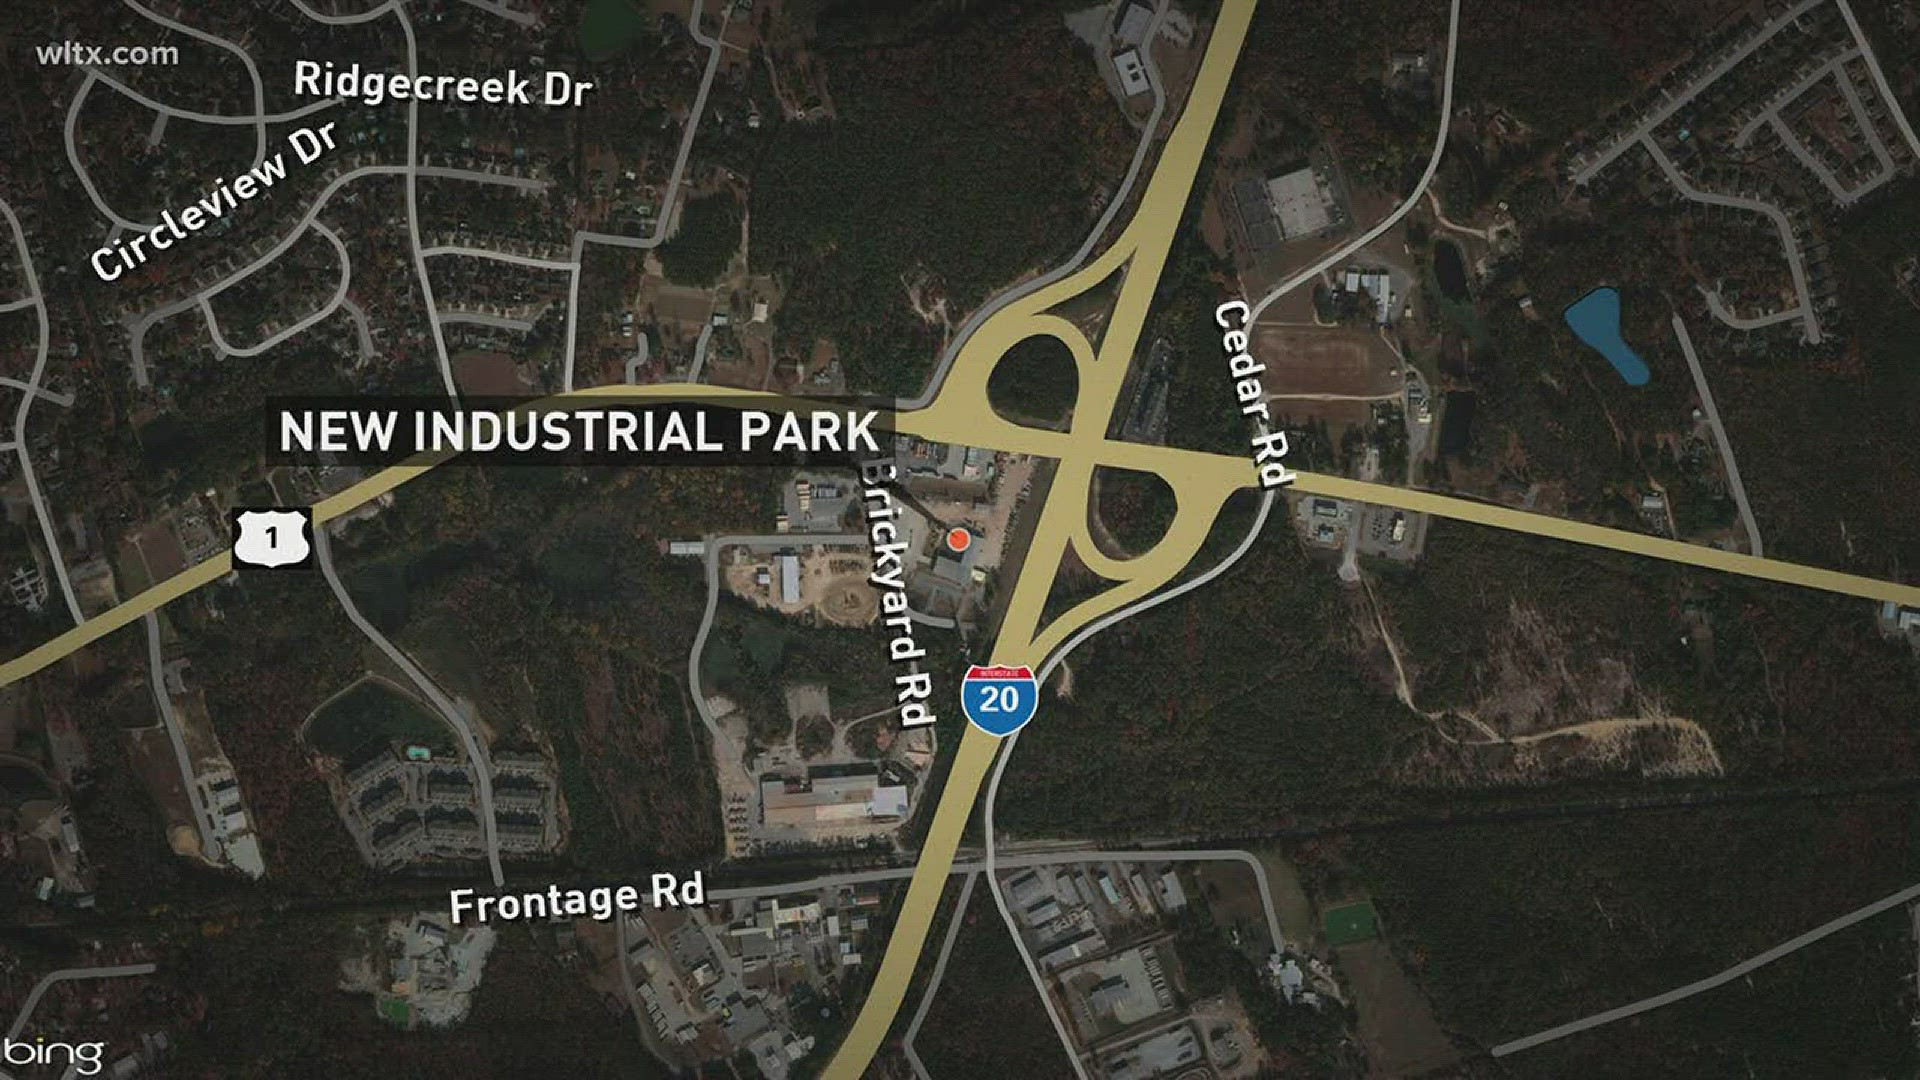 The two companies will expand their efforts at a new industrial park in the county.